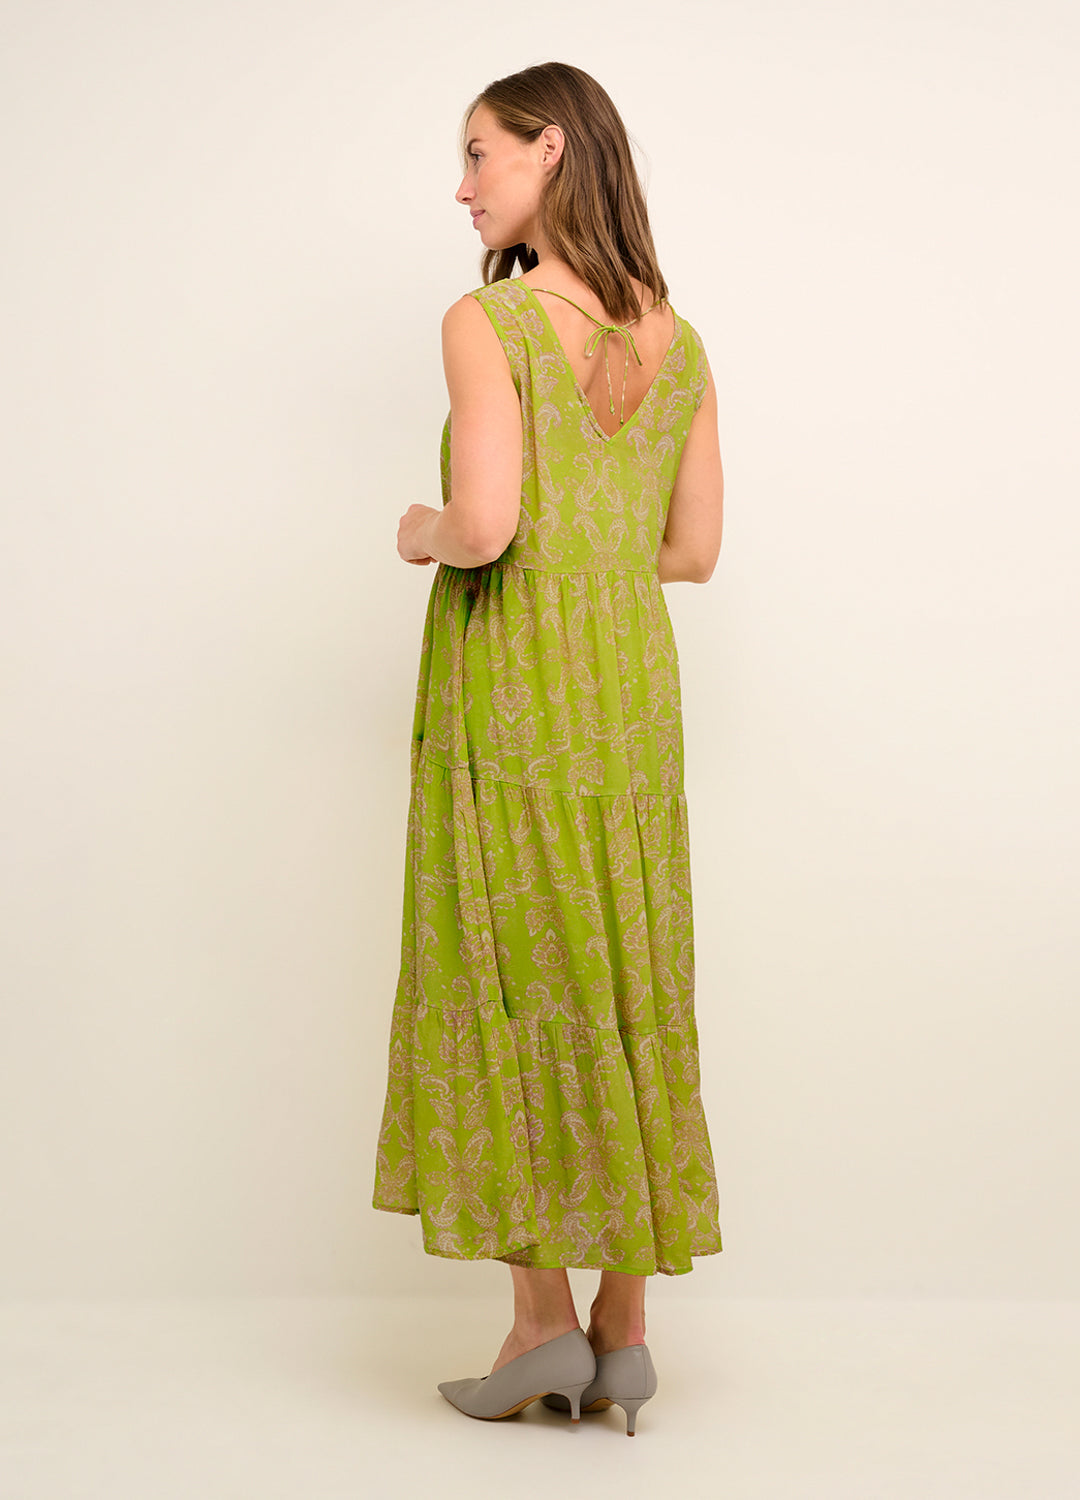 Back of the Cream Clothing Param Long Dress in Wild Lime tapestry print at Inner Beach Co, Toronto, Ontario, Canada